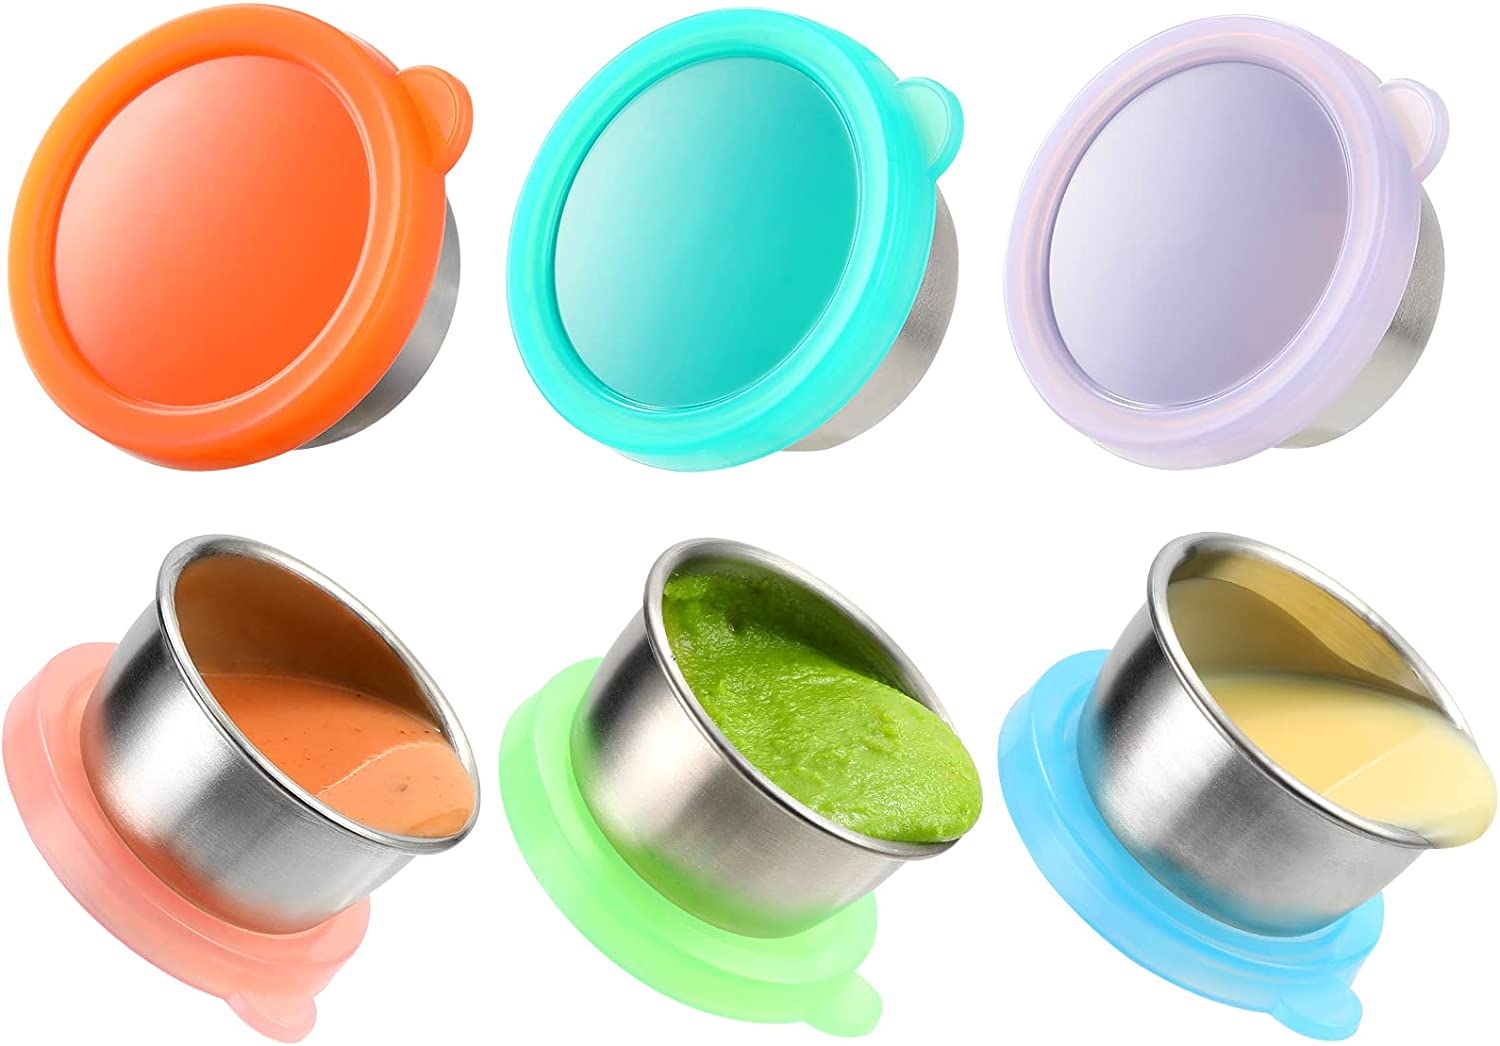 Condiment Cups Containers with Lid 6 pk. 2.3 oz. Salad Dressing to go Small  Mini Food Storage Containers with Sauce Cups Leak proof Reusable Plastic